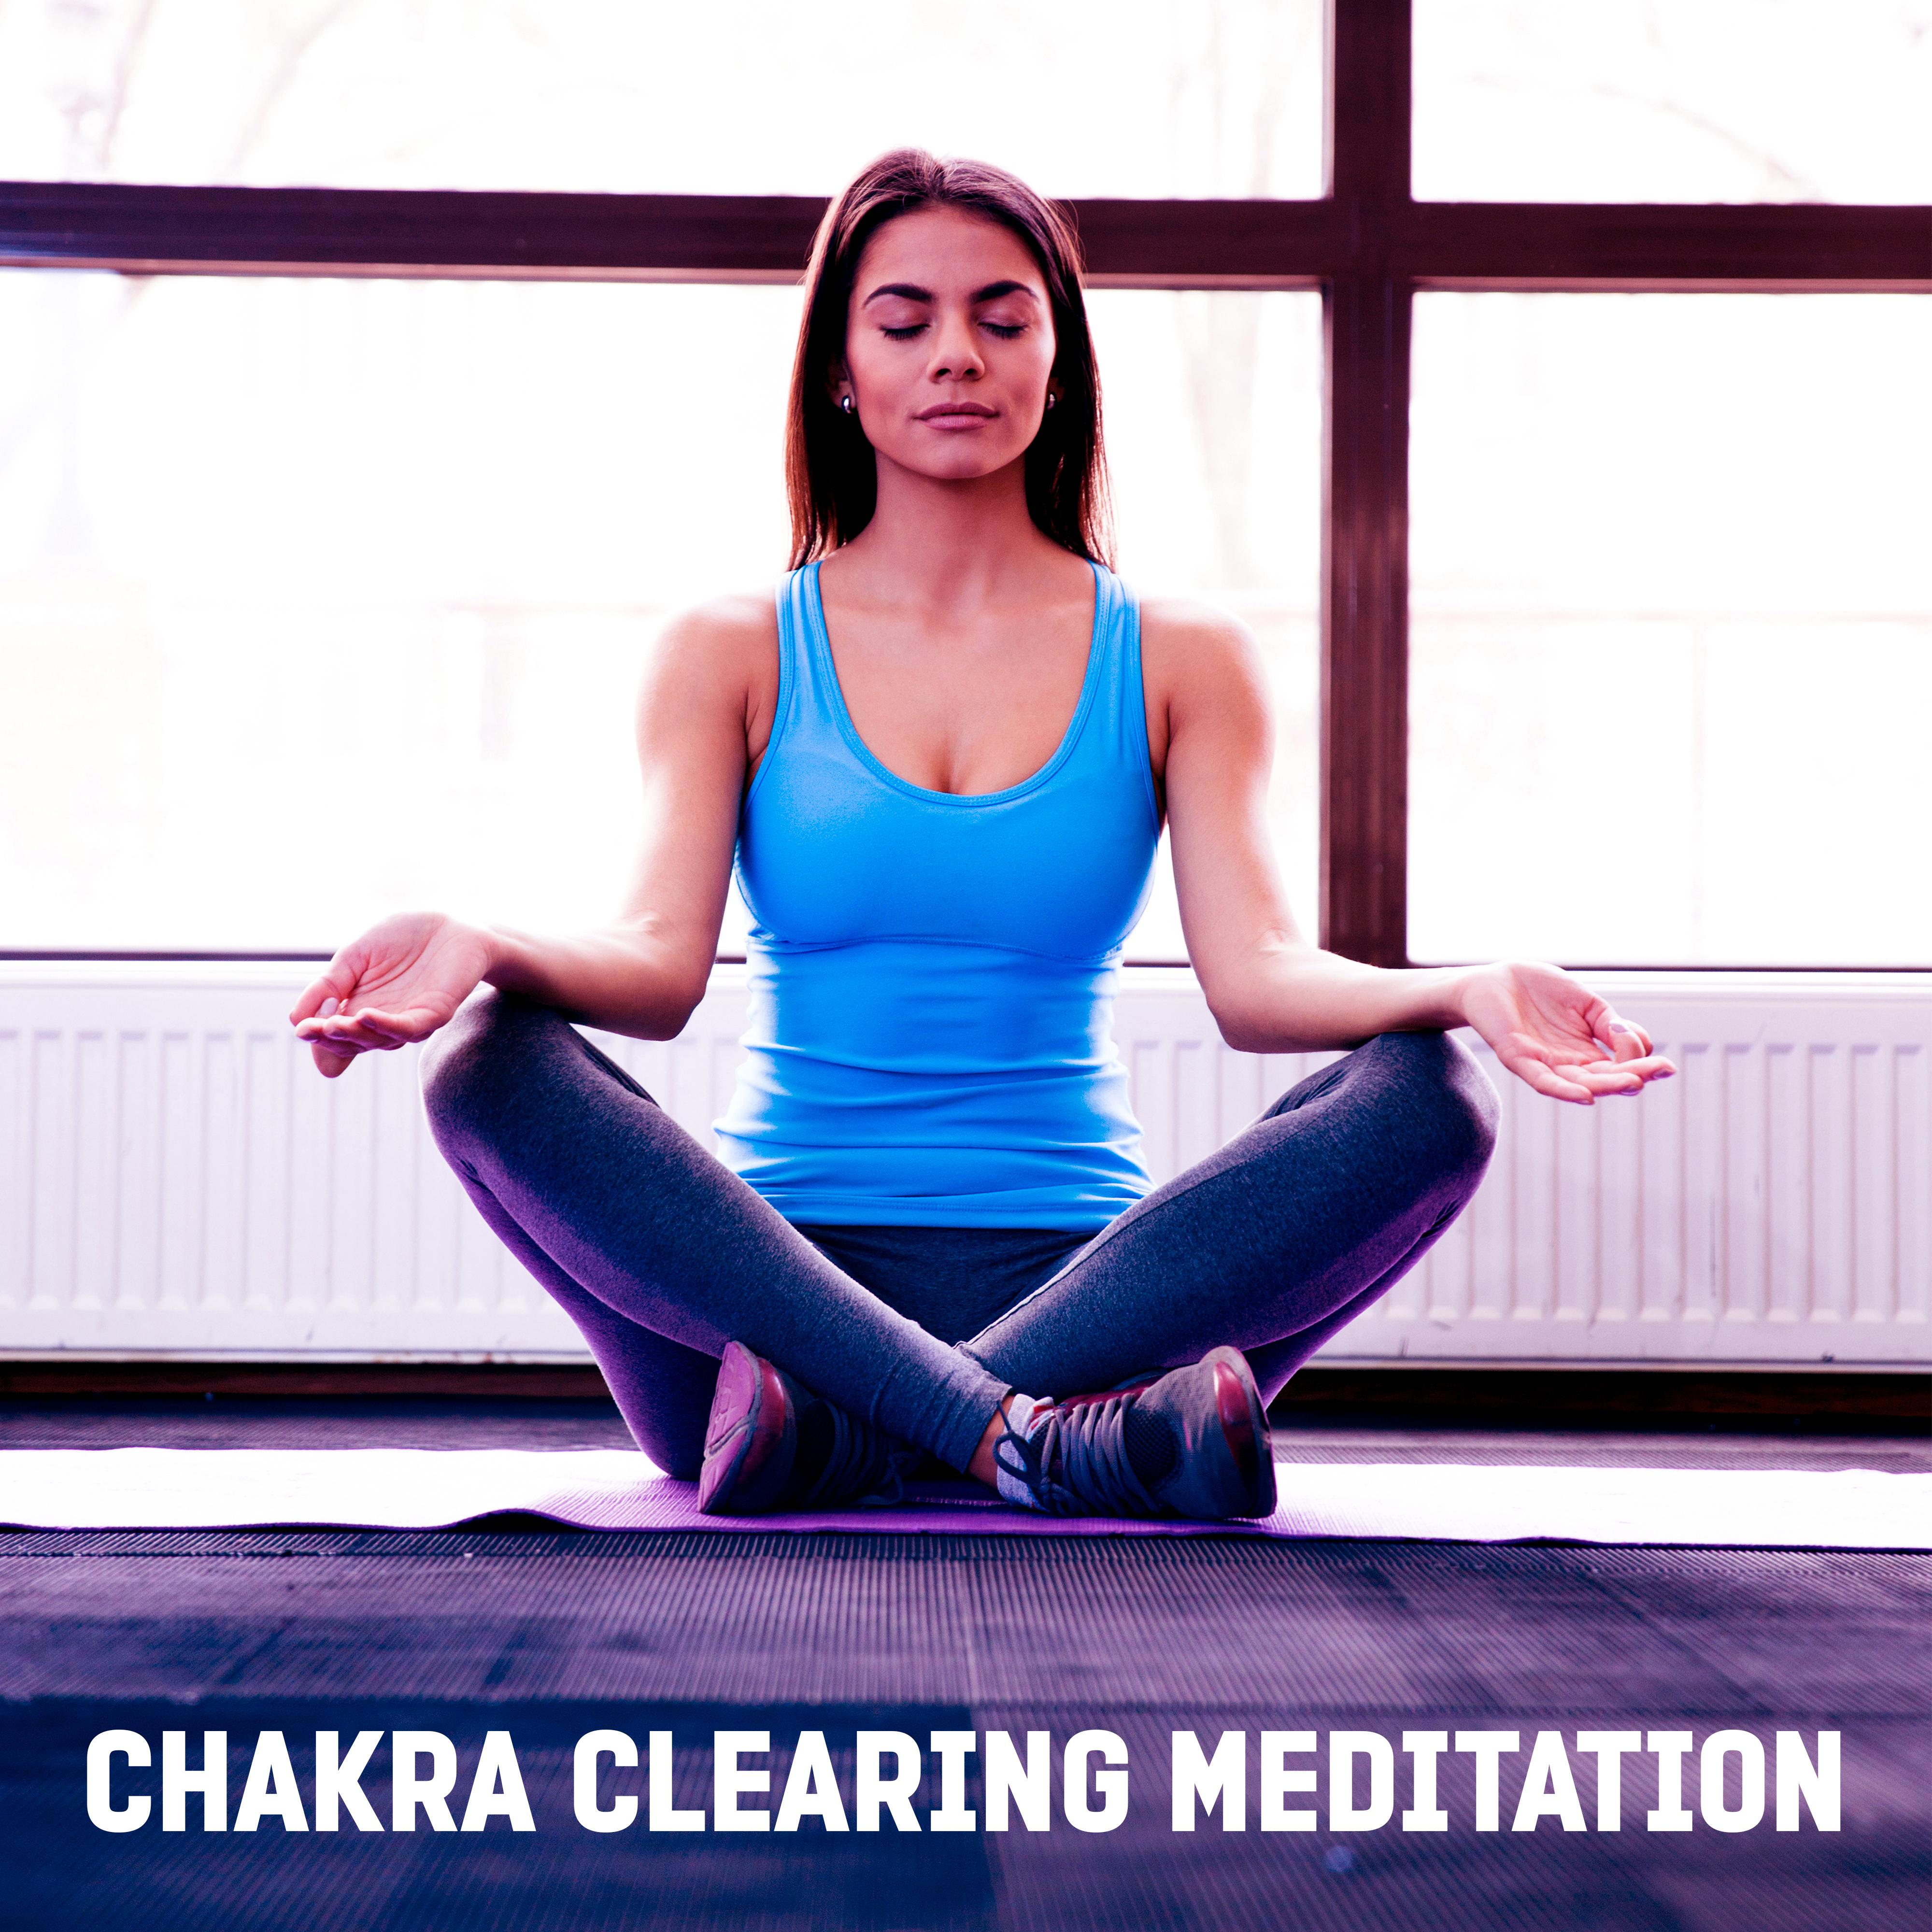 Chakra Clearing Meditation – Yoga Music, Healing Nature Sounds, Relaxing Music Before Sleep, Placid Songs